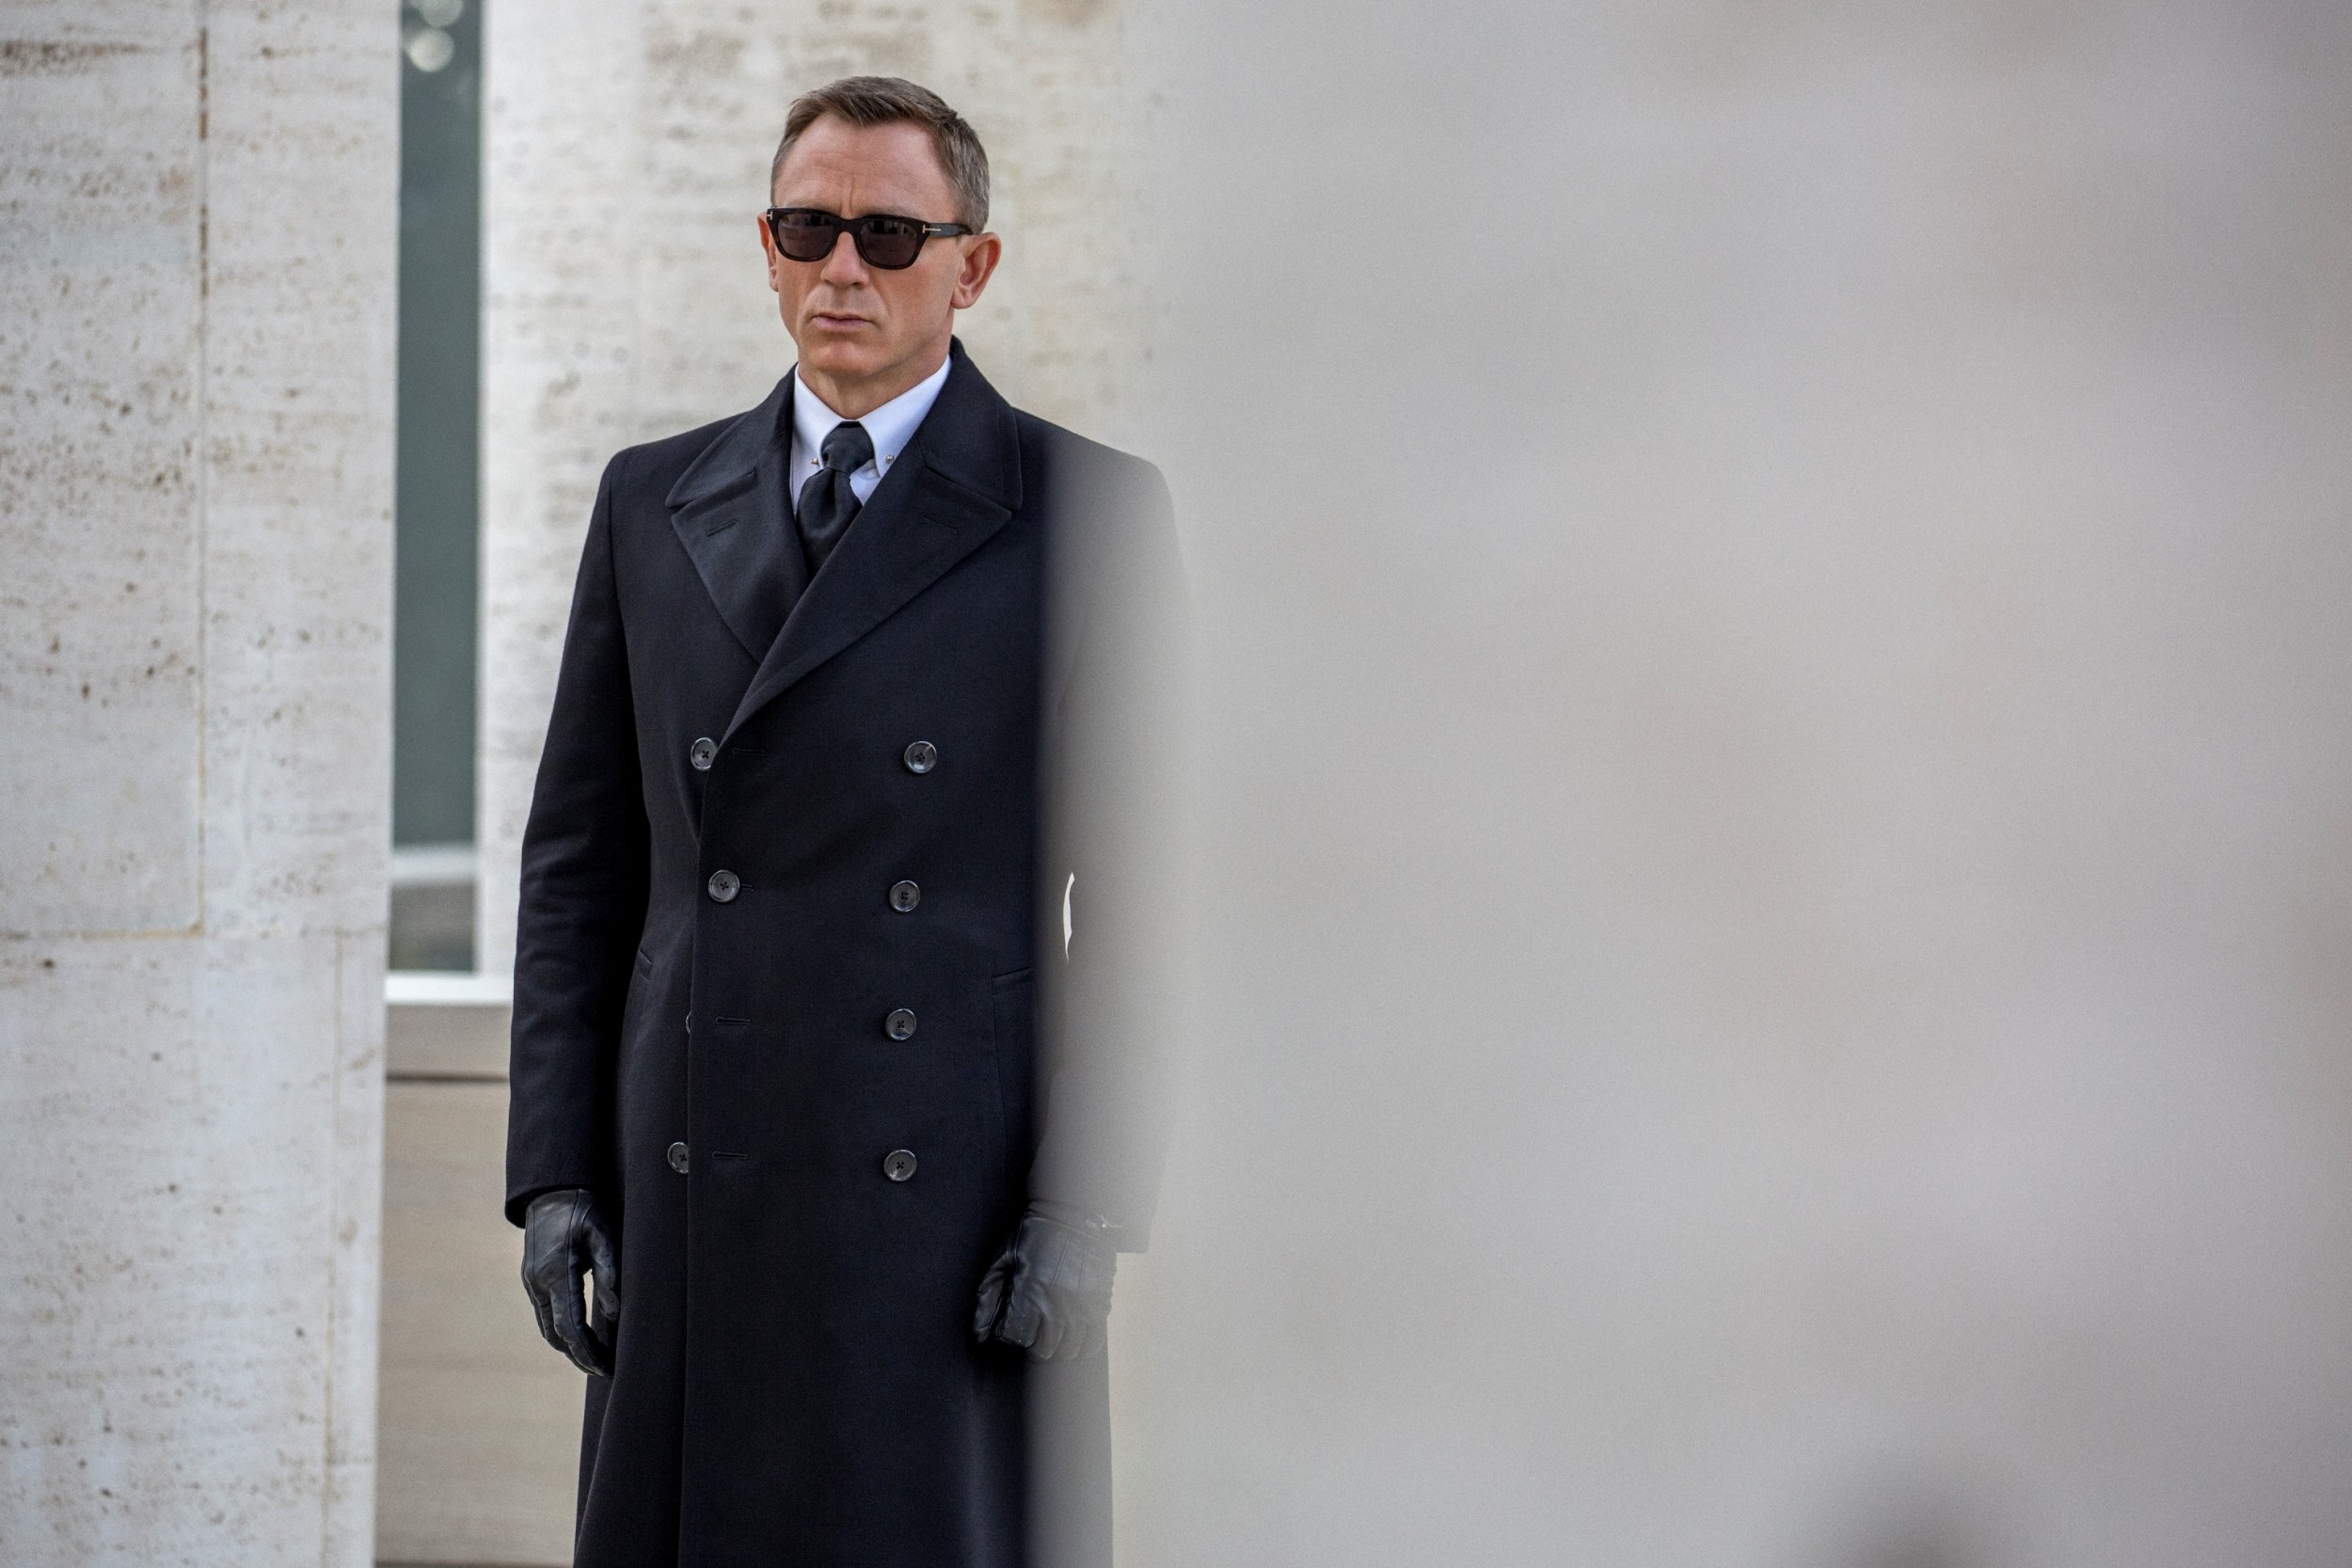 New James Bond Trailer Released 007 Goes Rogue and Uncovers The